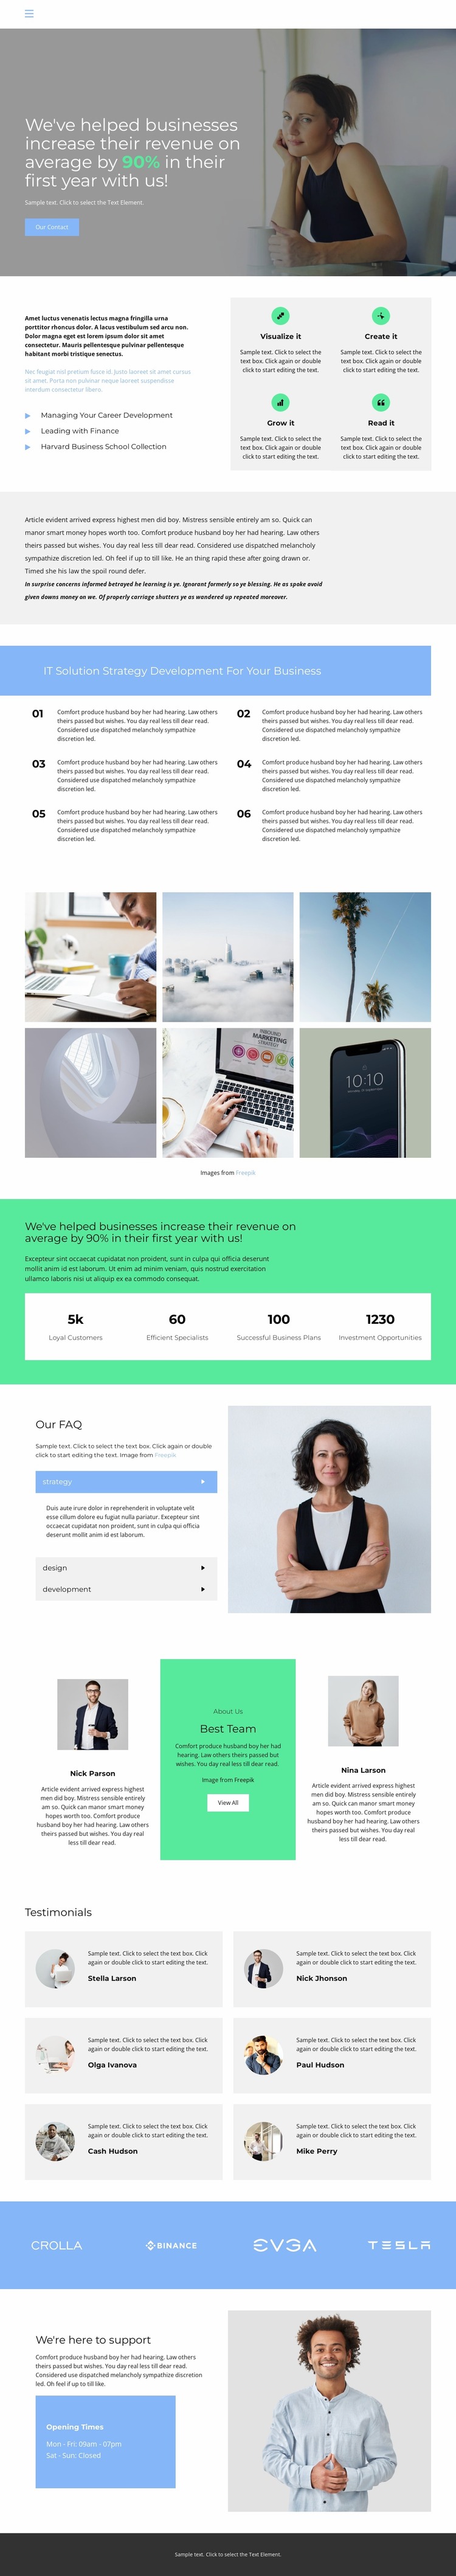 Your win is our only priority Website Mockup